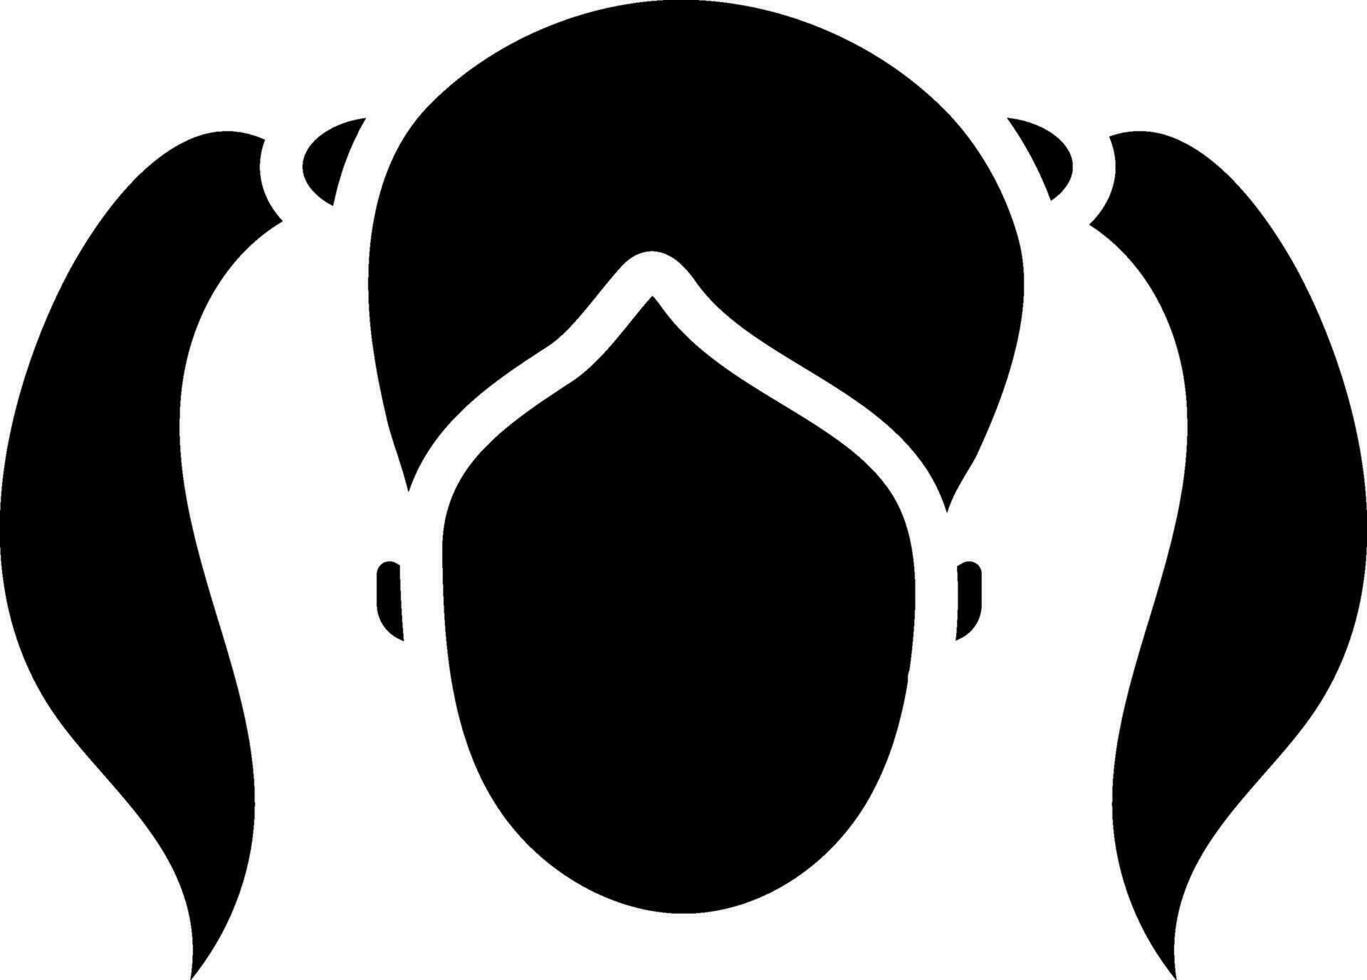 Young Girl Face With Two Side Ponytails Icon In black and white Color. vector